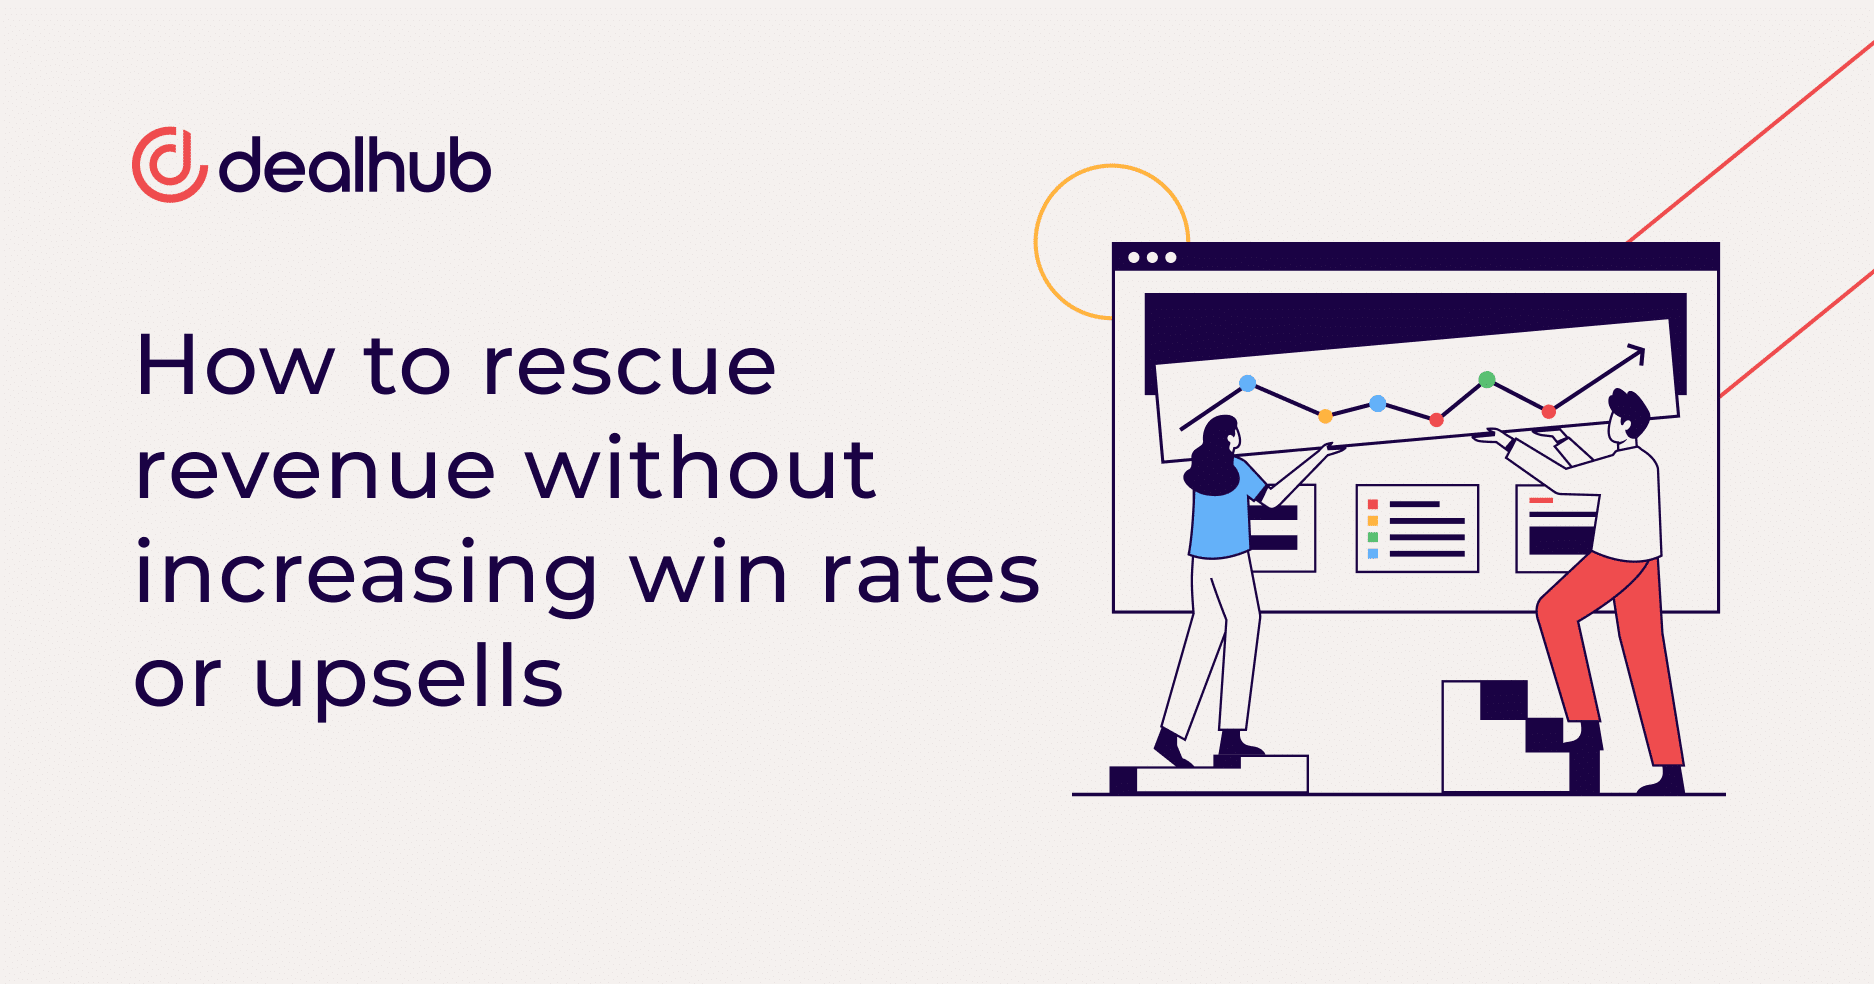 How to rescue revenue without increasing win rates or upsells